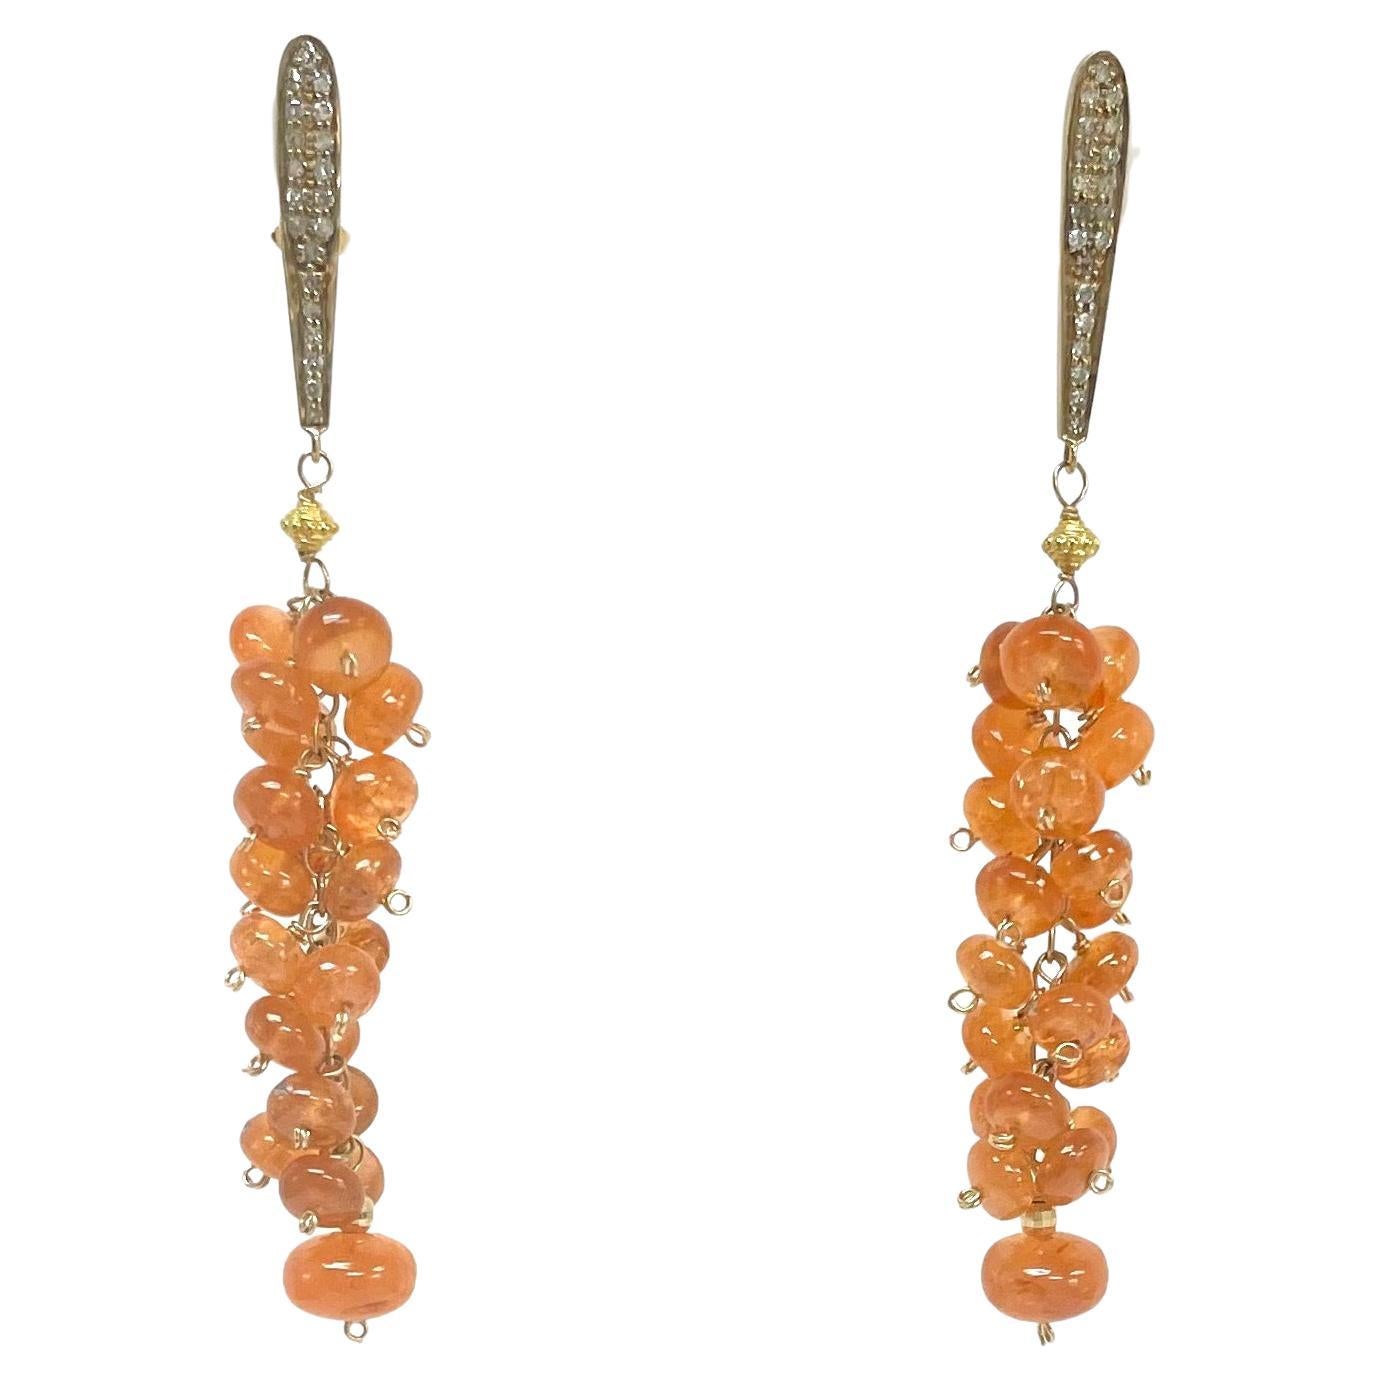 92 Carats Orange Spessartite with Gold and Diamonds Cluster Earrings For Sale